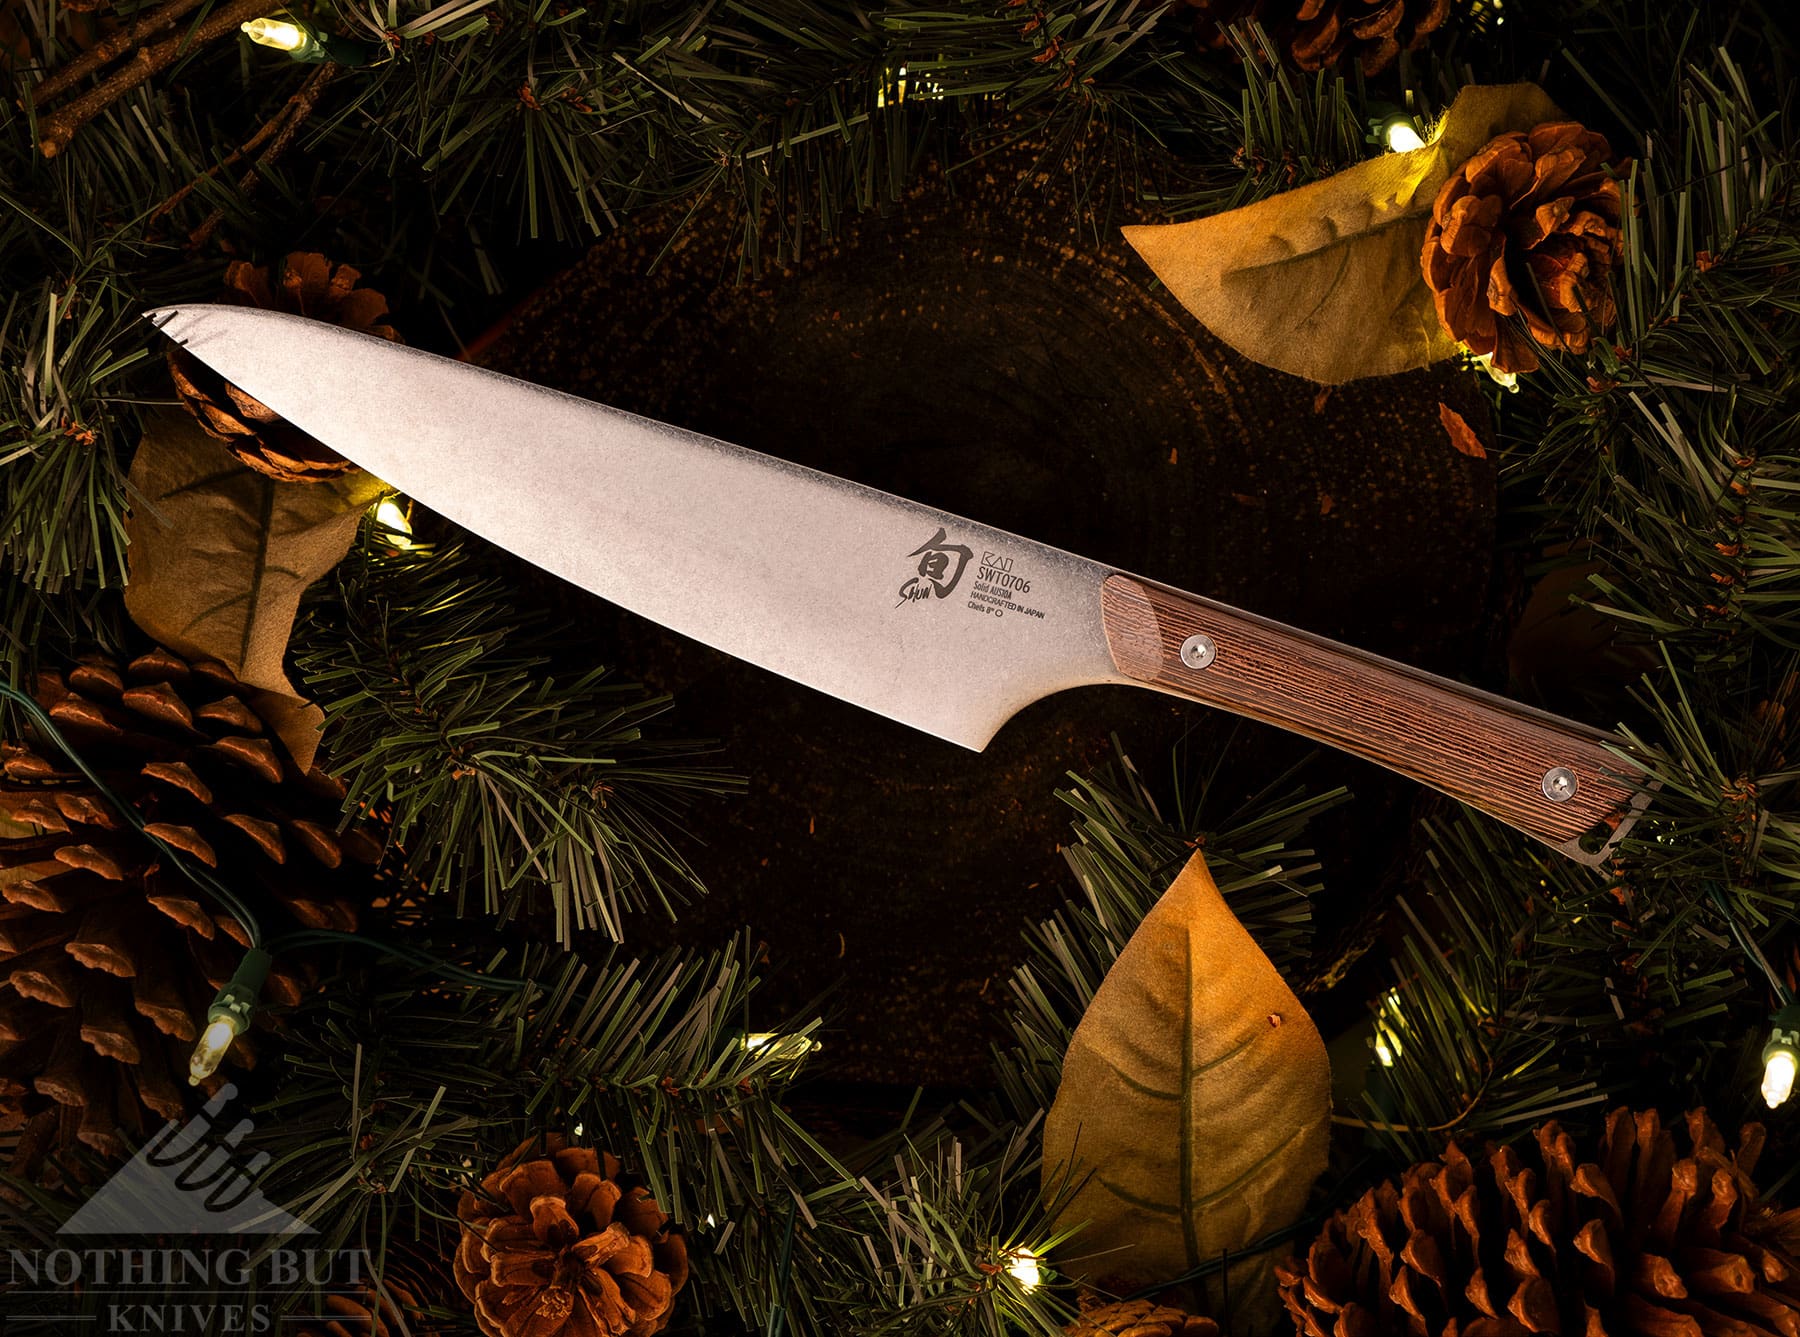 The Shun kanso is a realatively affordable chef knife for the Japanese cutlery fan on your gift list. 